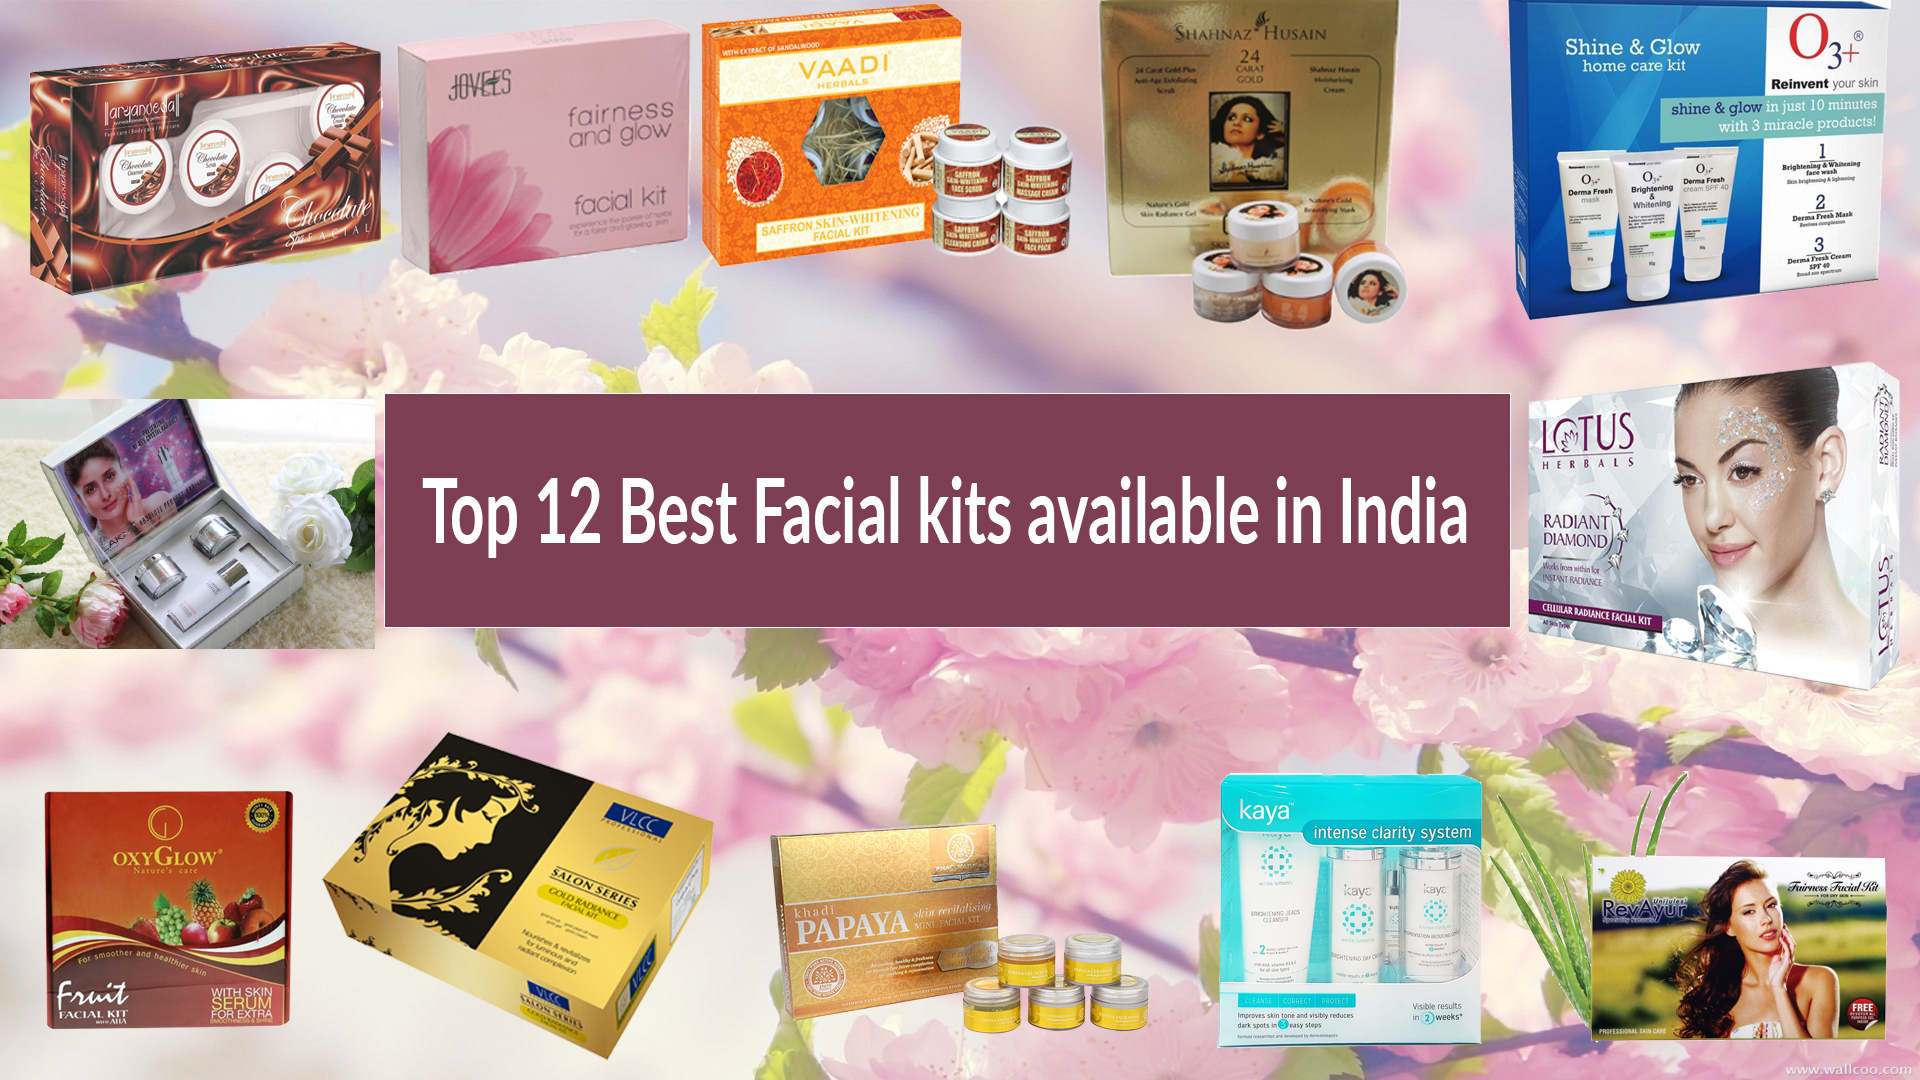 TOP 12 BEST FACIAL KIT AVAILABLE IN INDIA – GET INSTANT FAIRNESS AND GLOWING SKIN